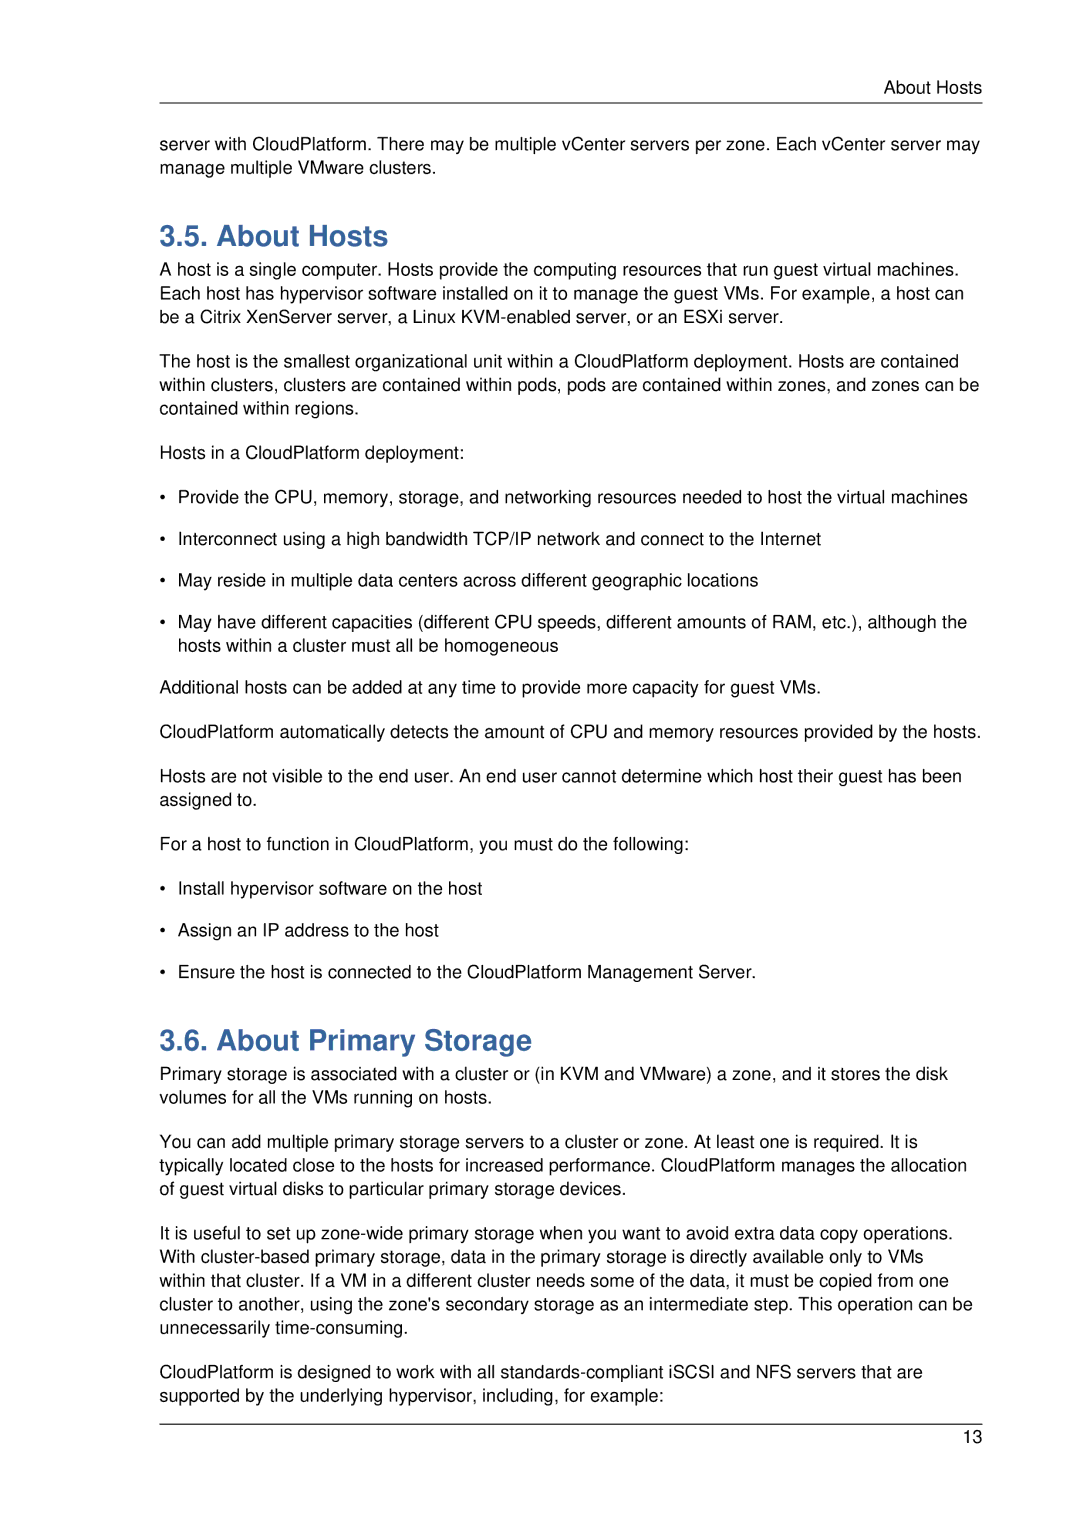 Citrix Systems 4.2 manual About Hosts, About Primary Storage 